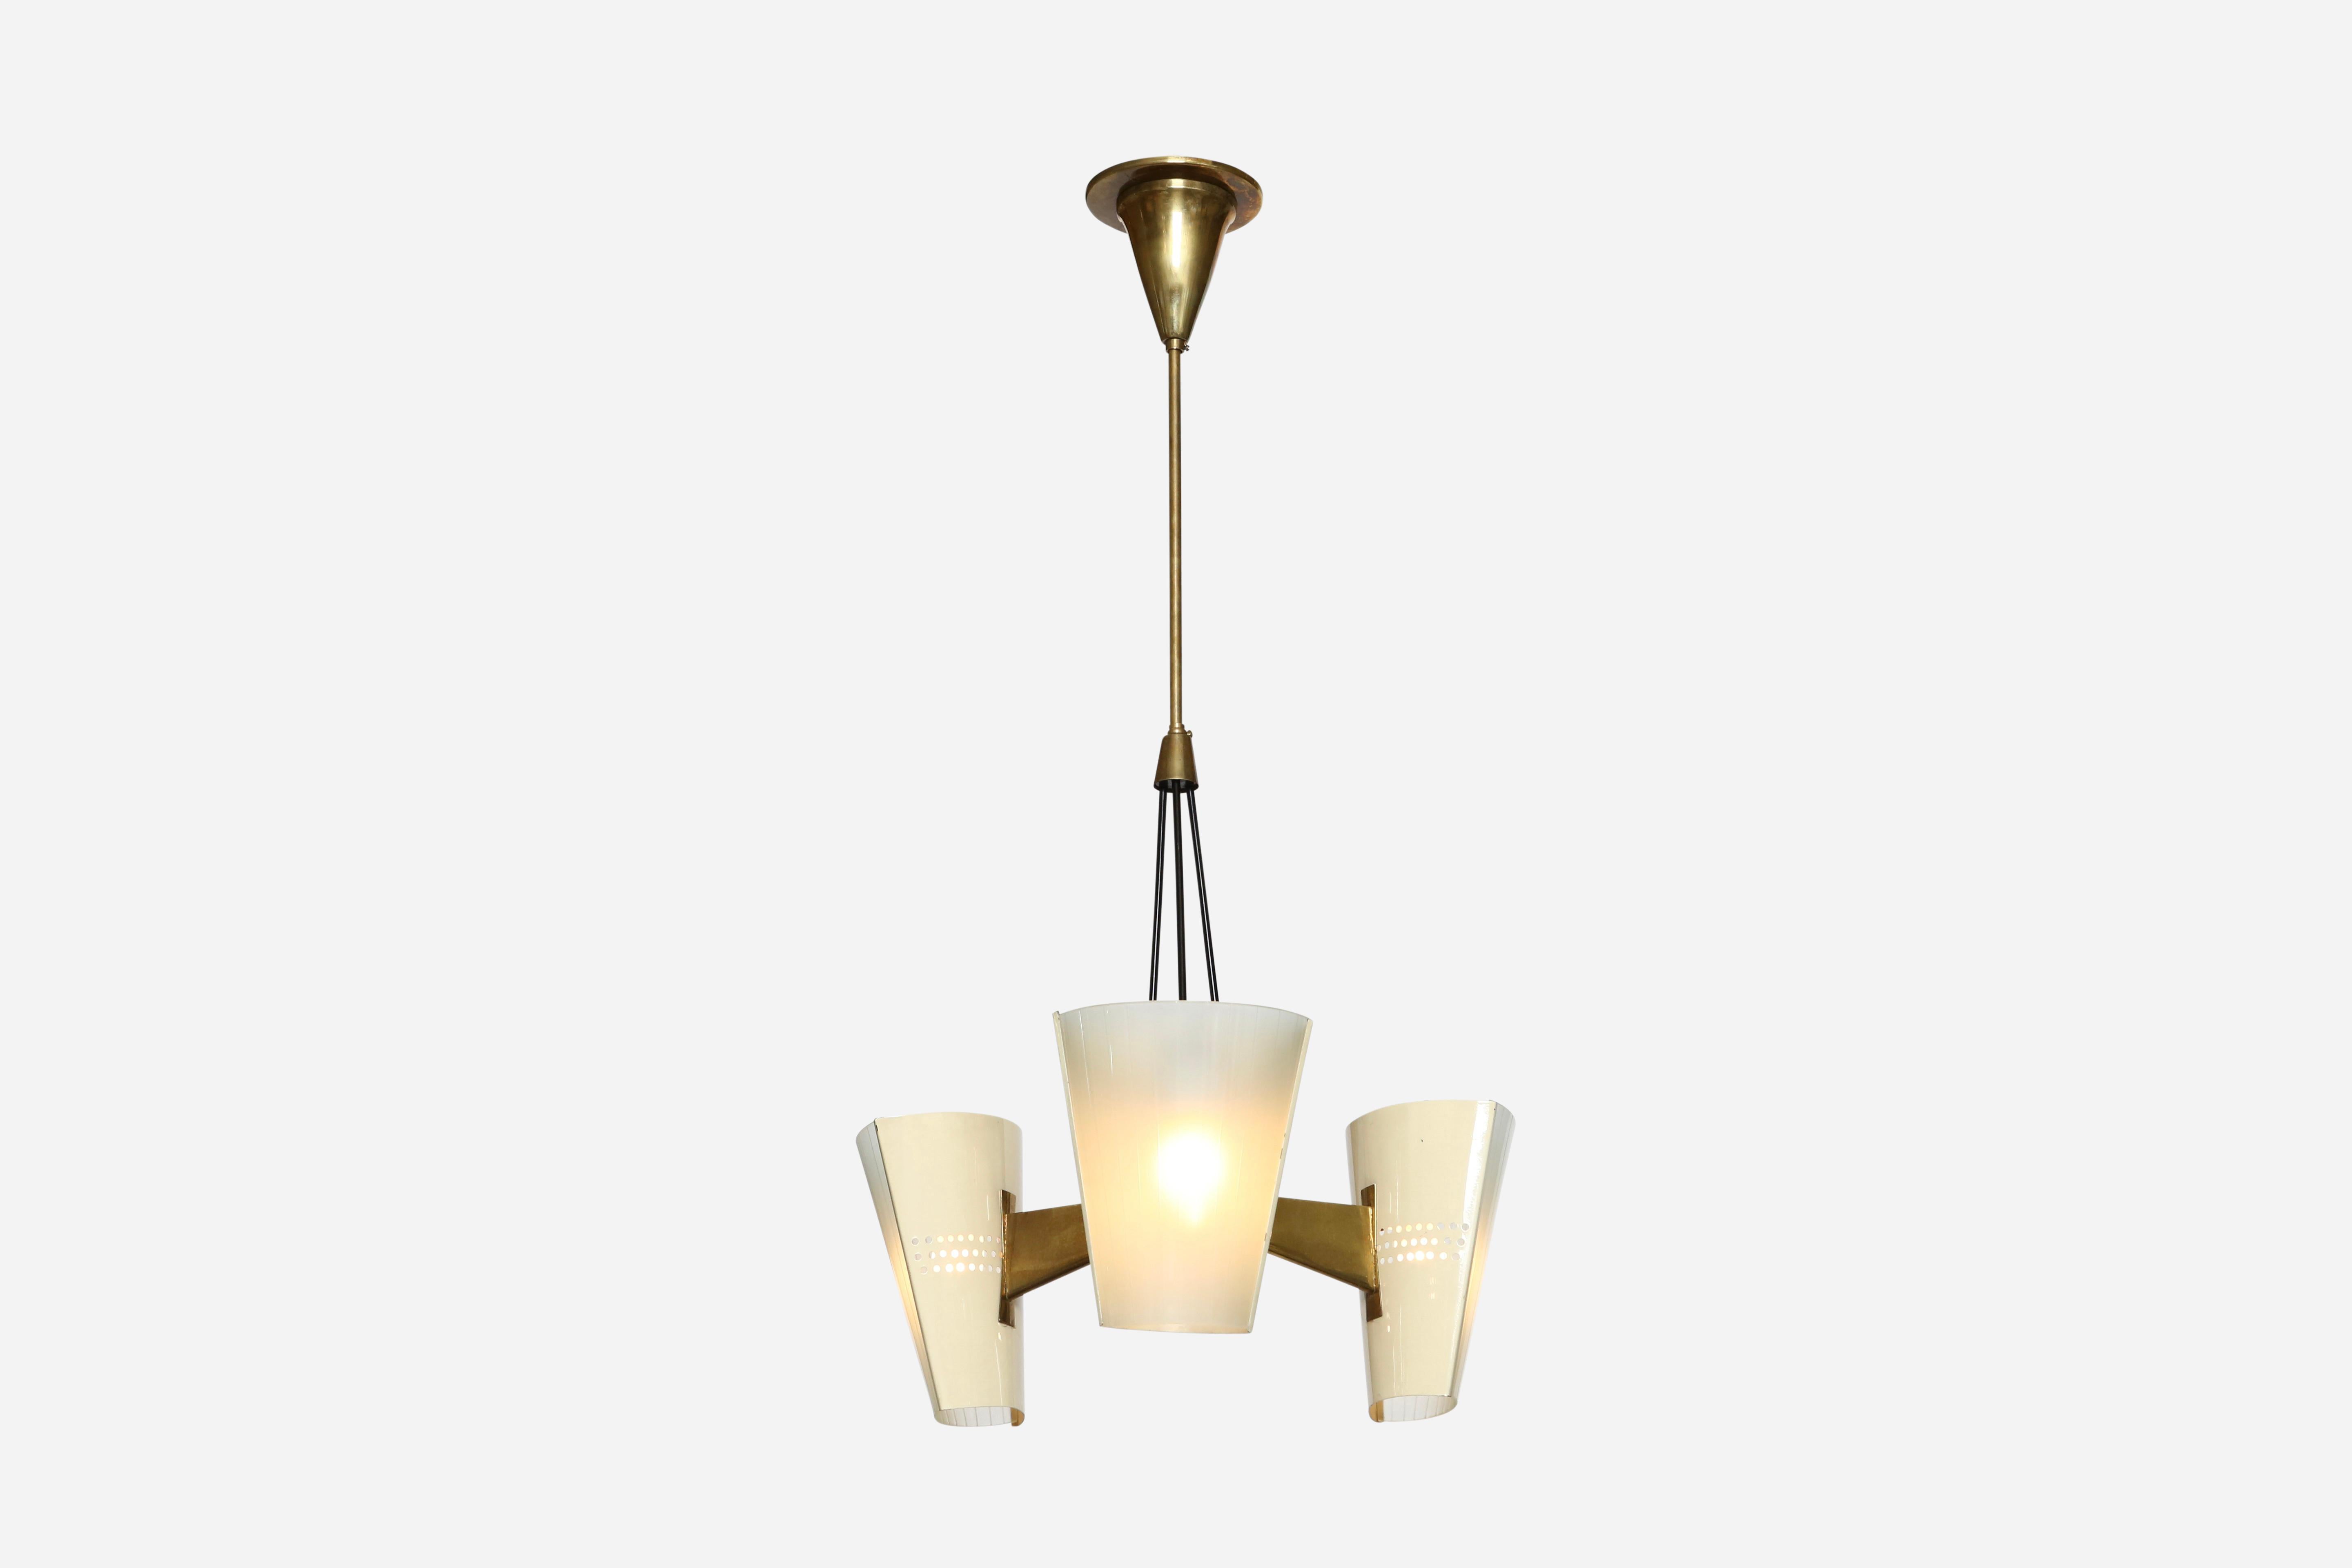 Stilnovo suspension light. Designed and manufactured in Italy in 1950s.
Glass, enameled metal, brass.
Three Edison bulbs.
Rewired for US.
Height adjustable.
Body of the fixture is 18 inches high.